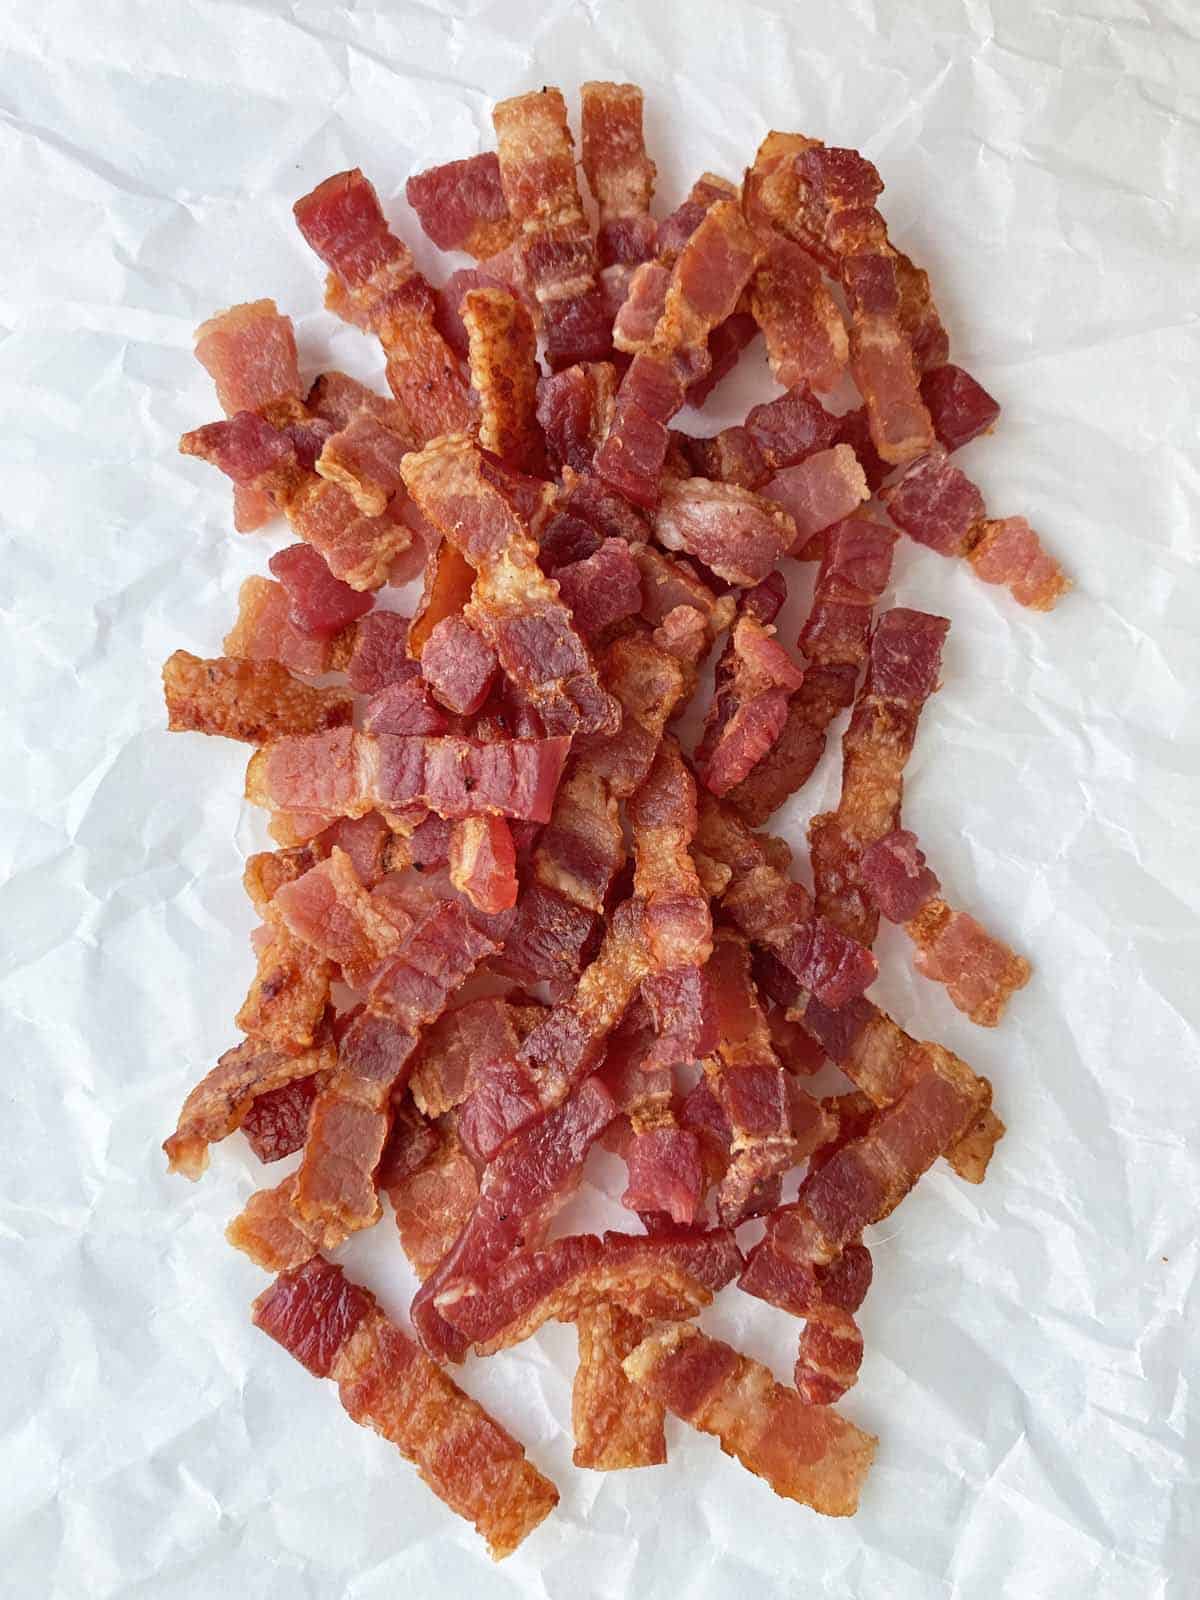 A pile of golden brown cooked bacon lardons on parchment paper.